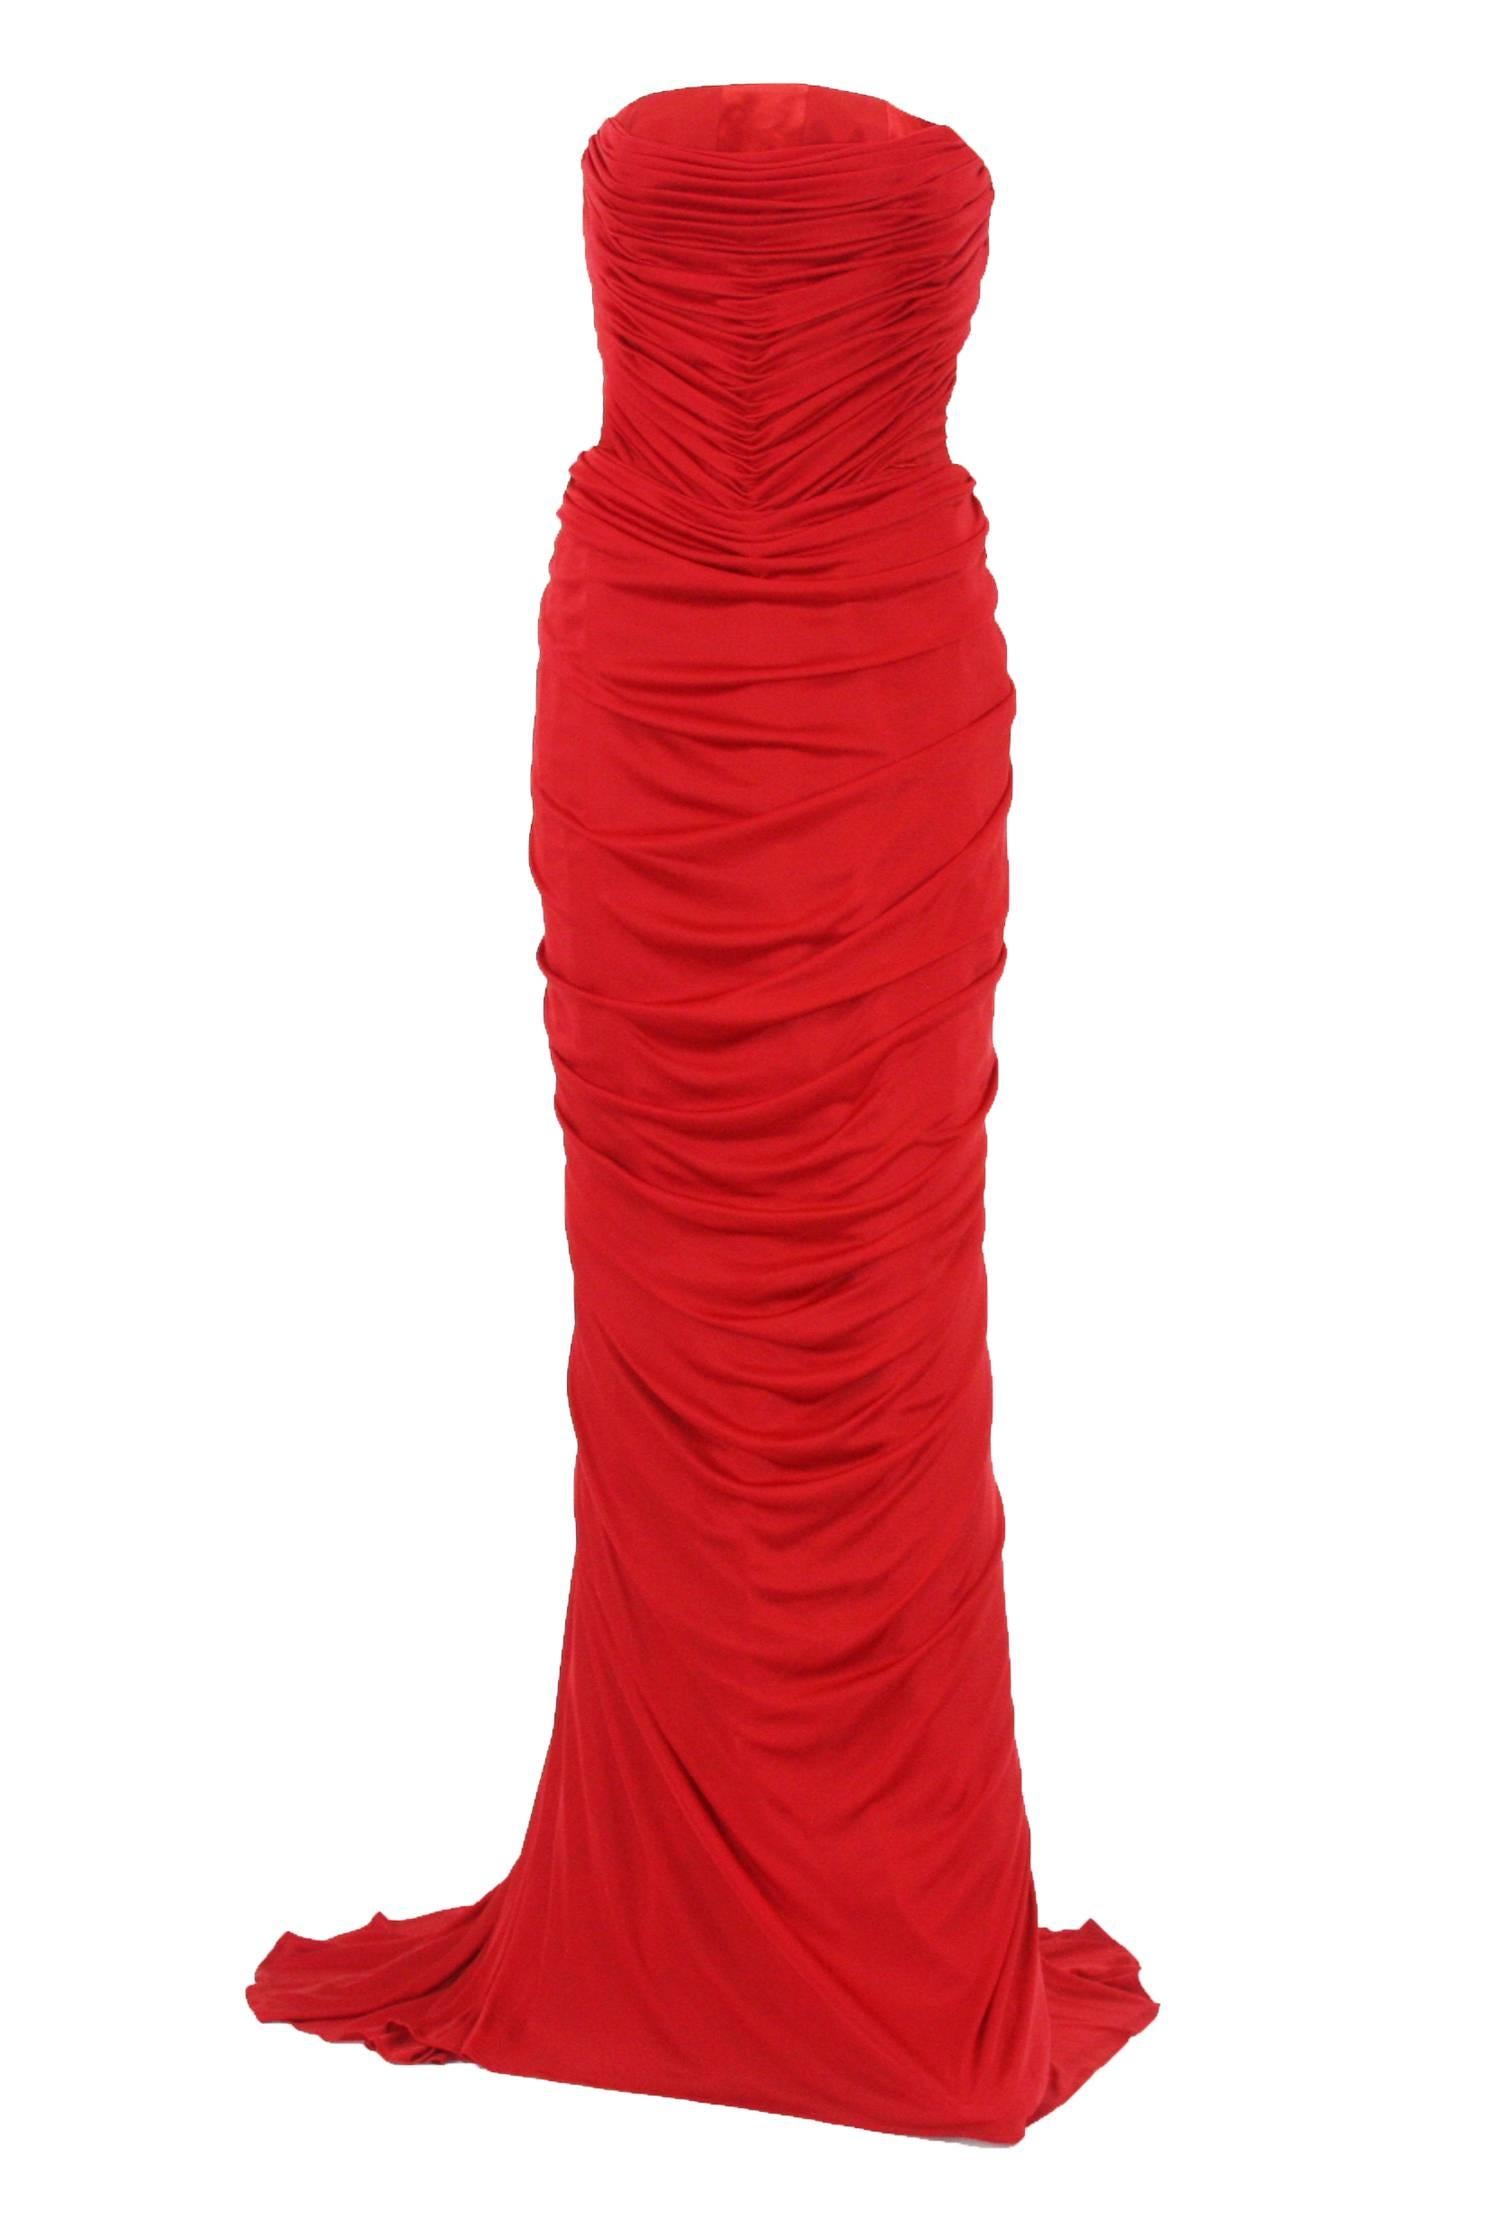 New Gianni Versace Couture 90's Dress Gown
Italian size 40 - US 4
Color - Lipstick Red
Corset, Red Beads Embellishment at Back
Double Satin Lining for Fullness and Style
Back Zip Closure
55% Silk, 29% Acetate, 16% Nylon. 
Made in Italy
New without